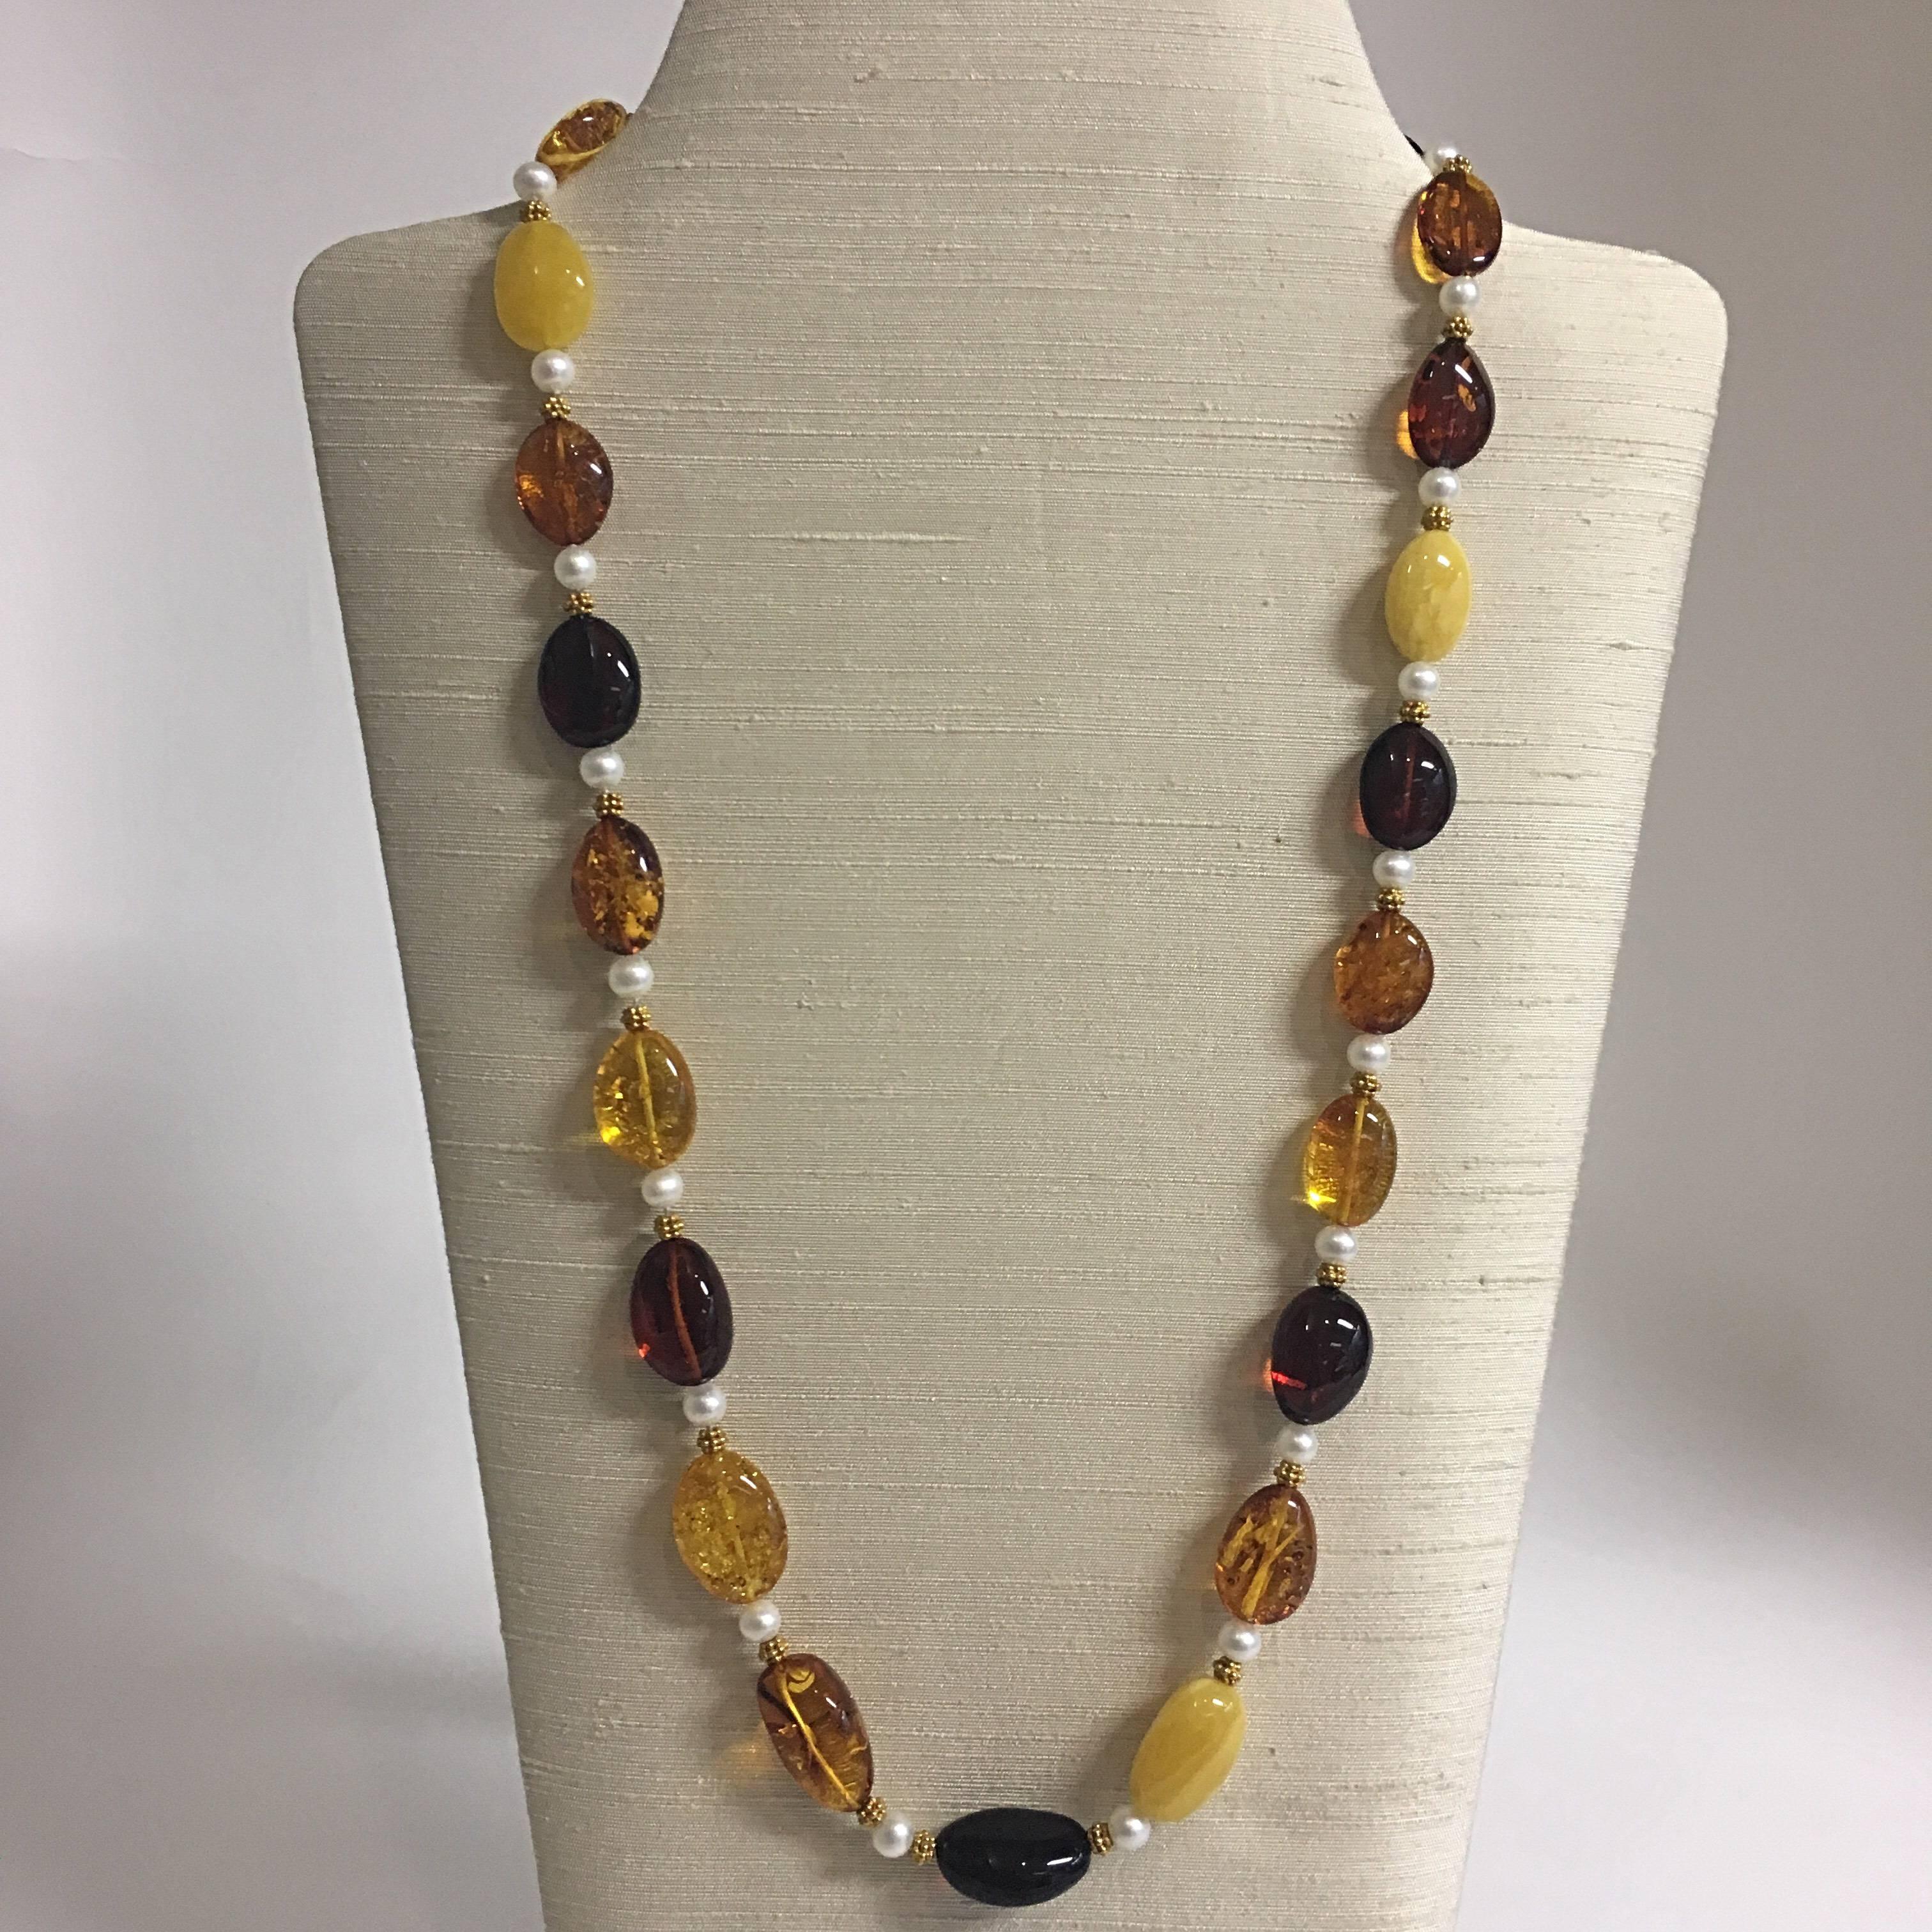 An elegant  29”L (74cmL) necklace with oval Baltic amber beads, ranging from 5/8”L (1.5cmL) to 1”L (2.5cmL) in butterscotch, lemon, honey, cognac and cherry colours, 18 karat granulated gold beads, freshwater pearls, and an 18 karat clasp with